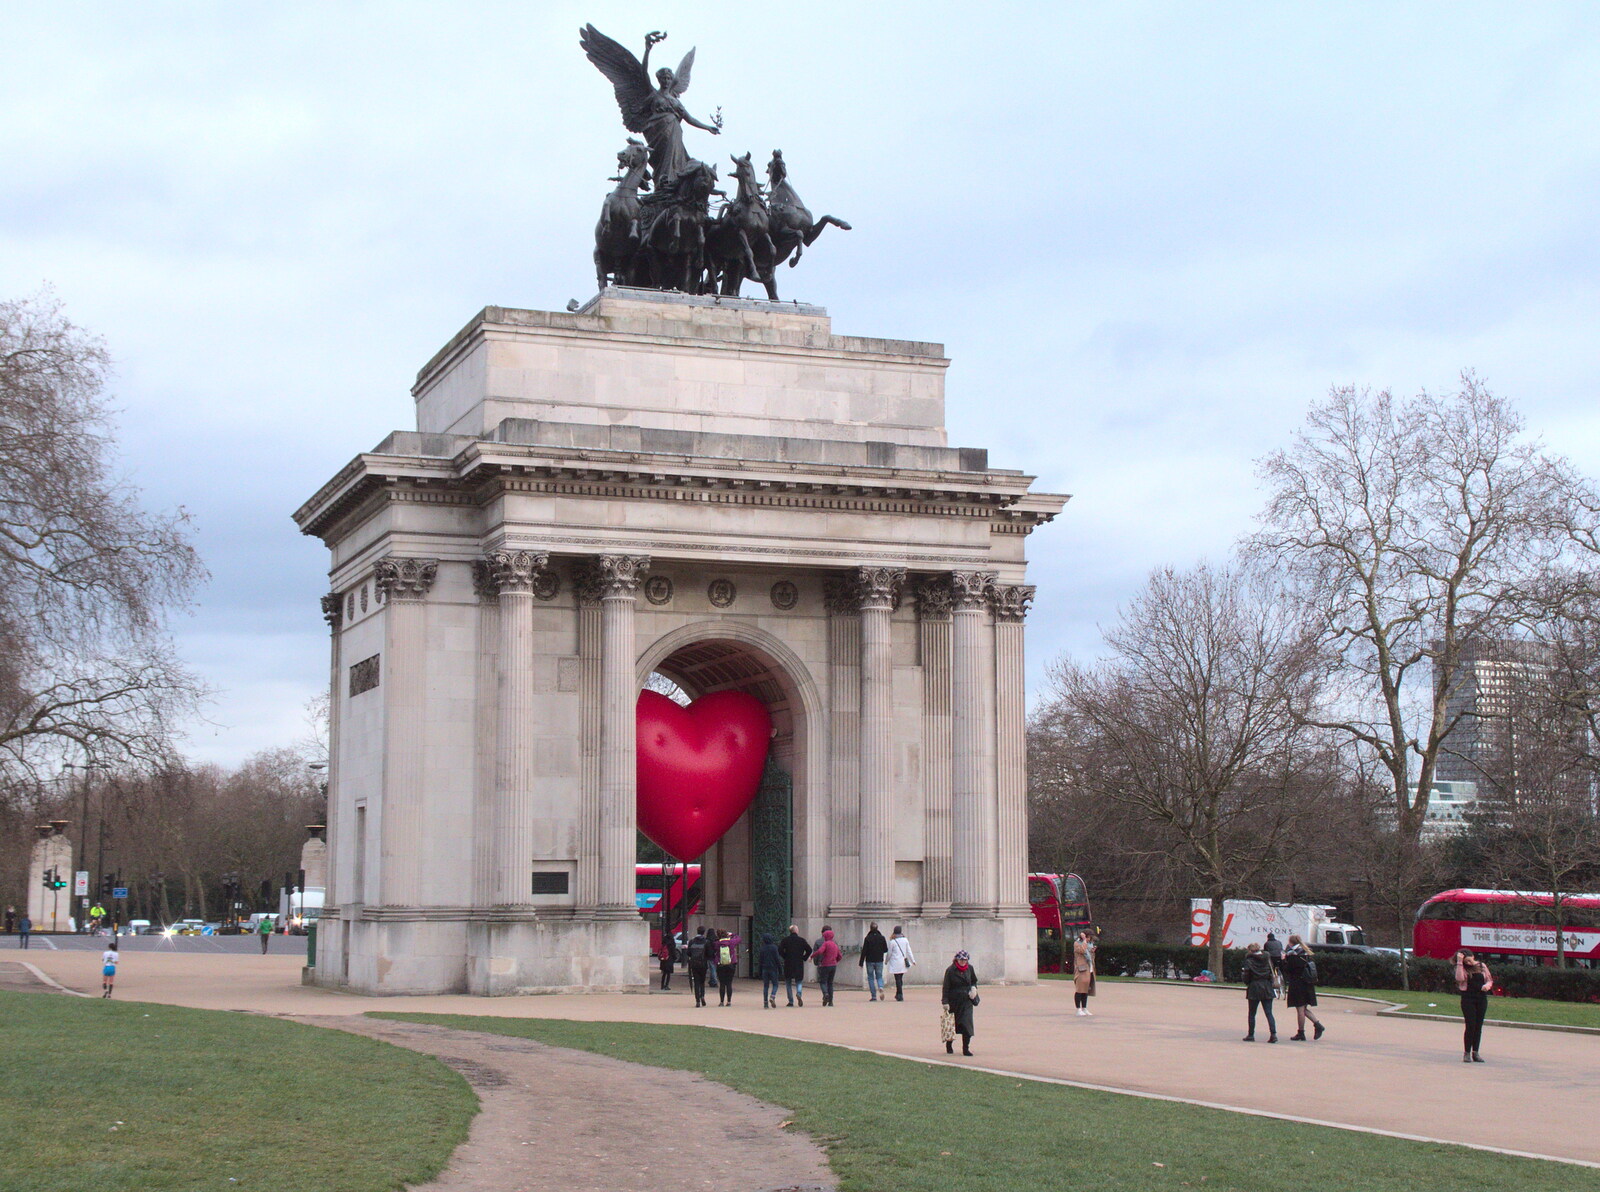 A Walk Around Eye, and the Return of Red Tent, Suffolk and London - 25th February 2018: There's an inflatable heart in Wellington Memorial